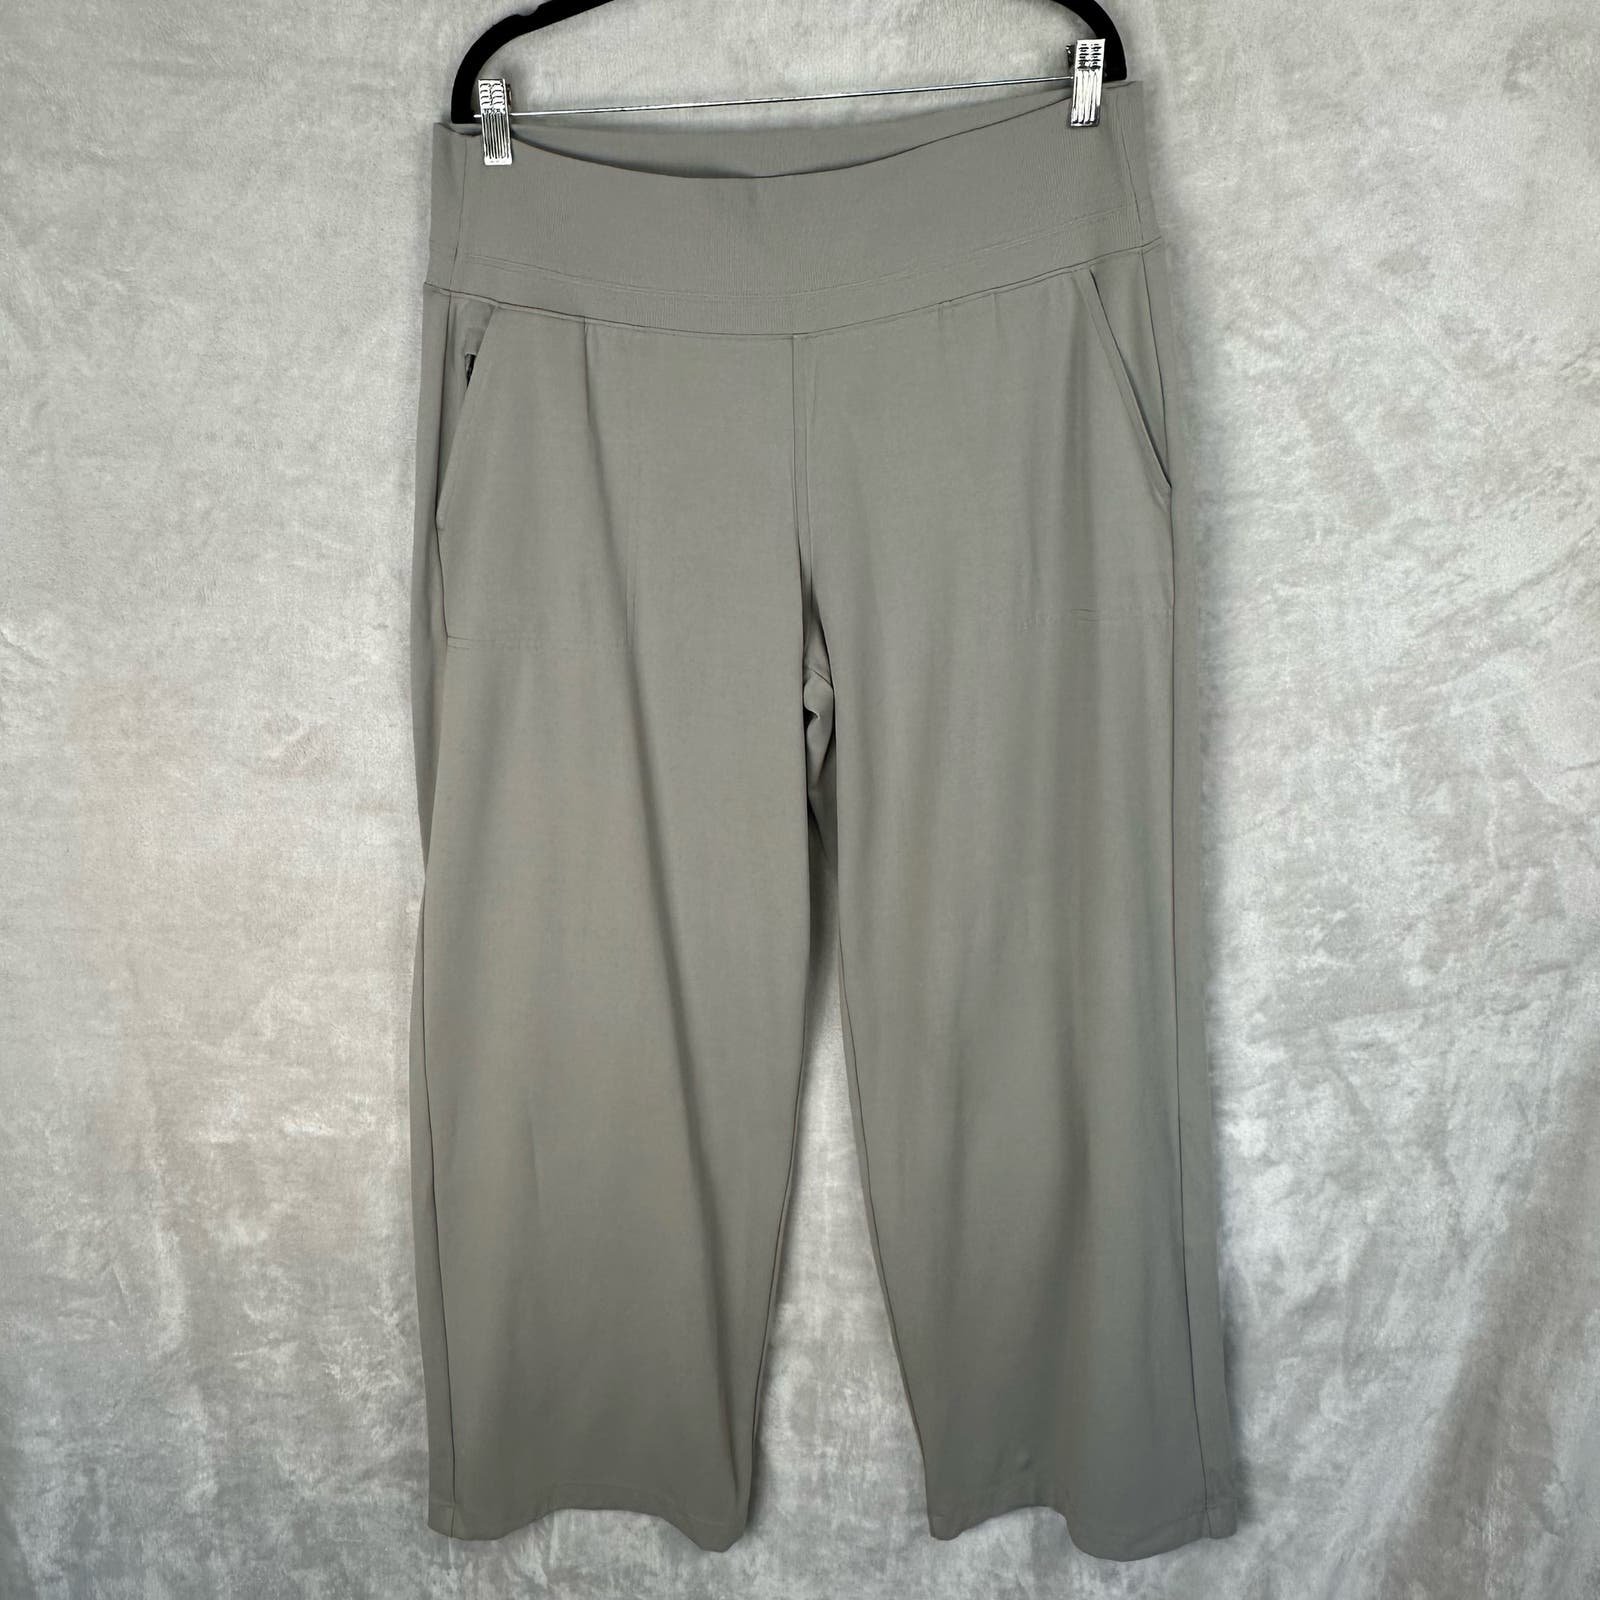 Comfortable Athleta Pants Womens Extra Large Gray Wide 